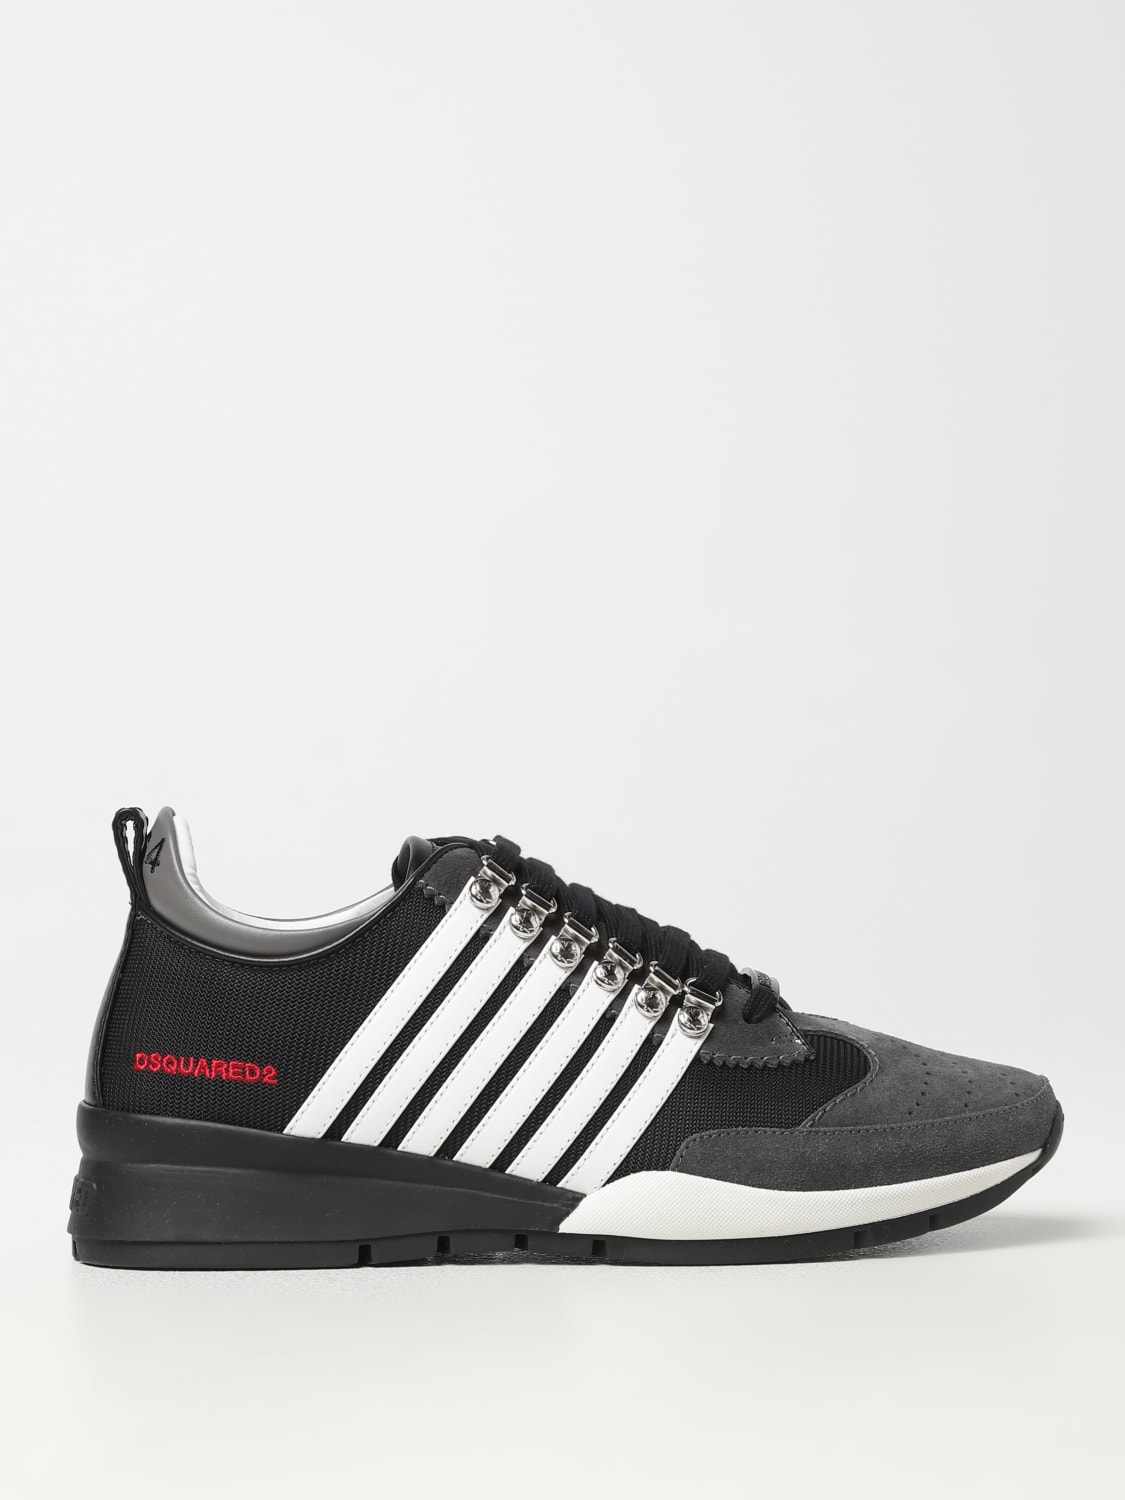 Lost Miraculous Pronounce DSQUARED2: sneakers for man - Black | Dsquared2 sneakers SNM030001604883  online at GIGLIO.COM